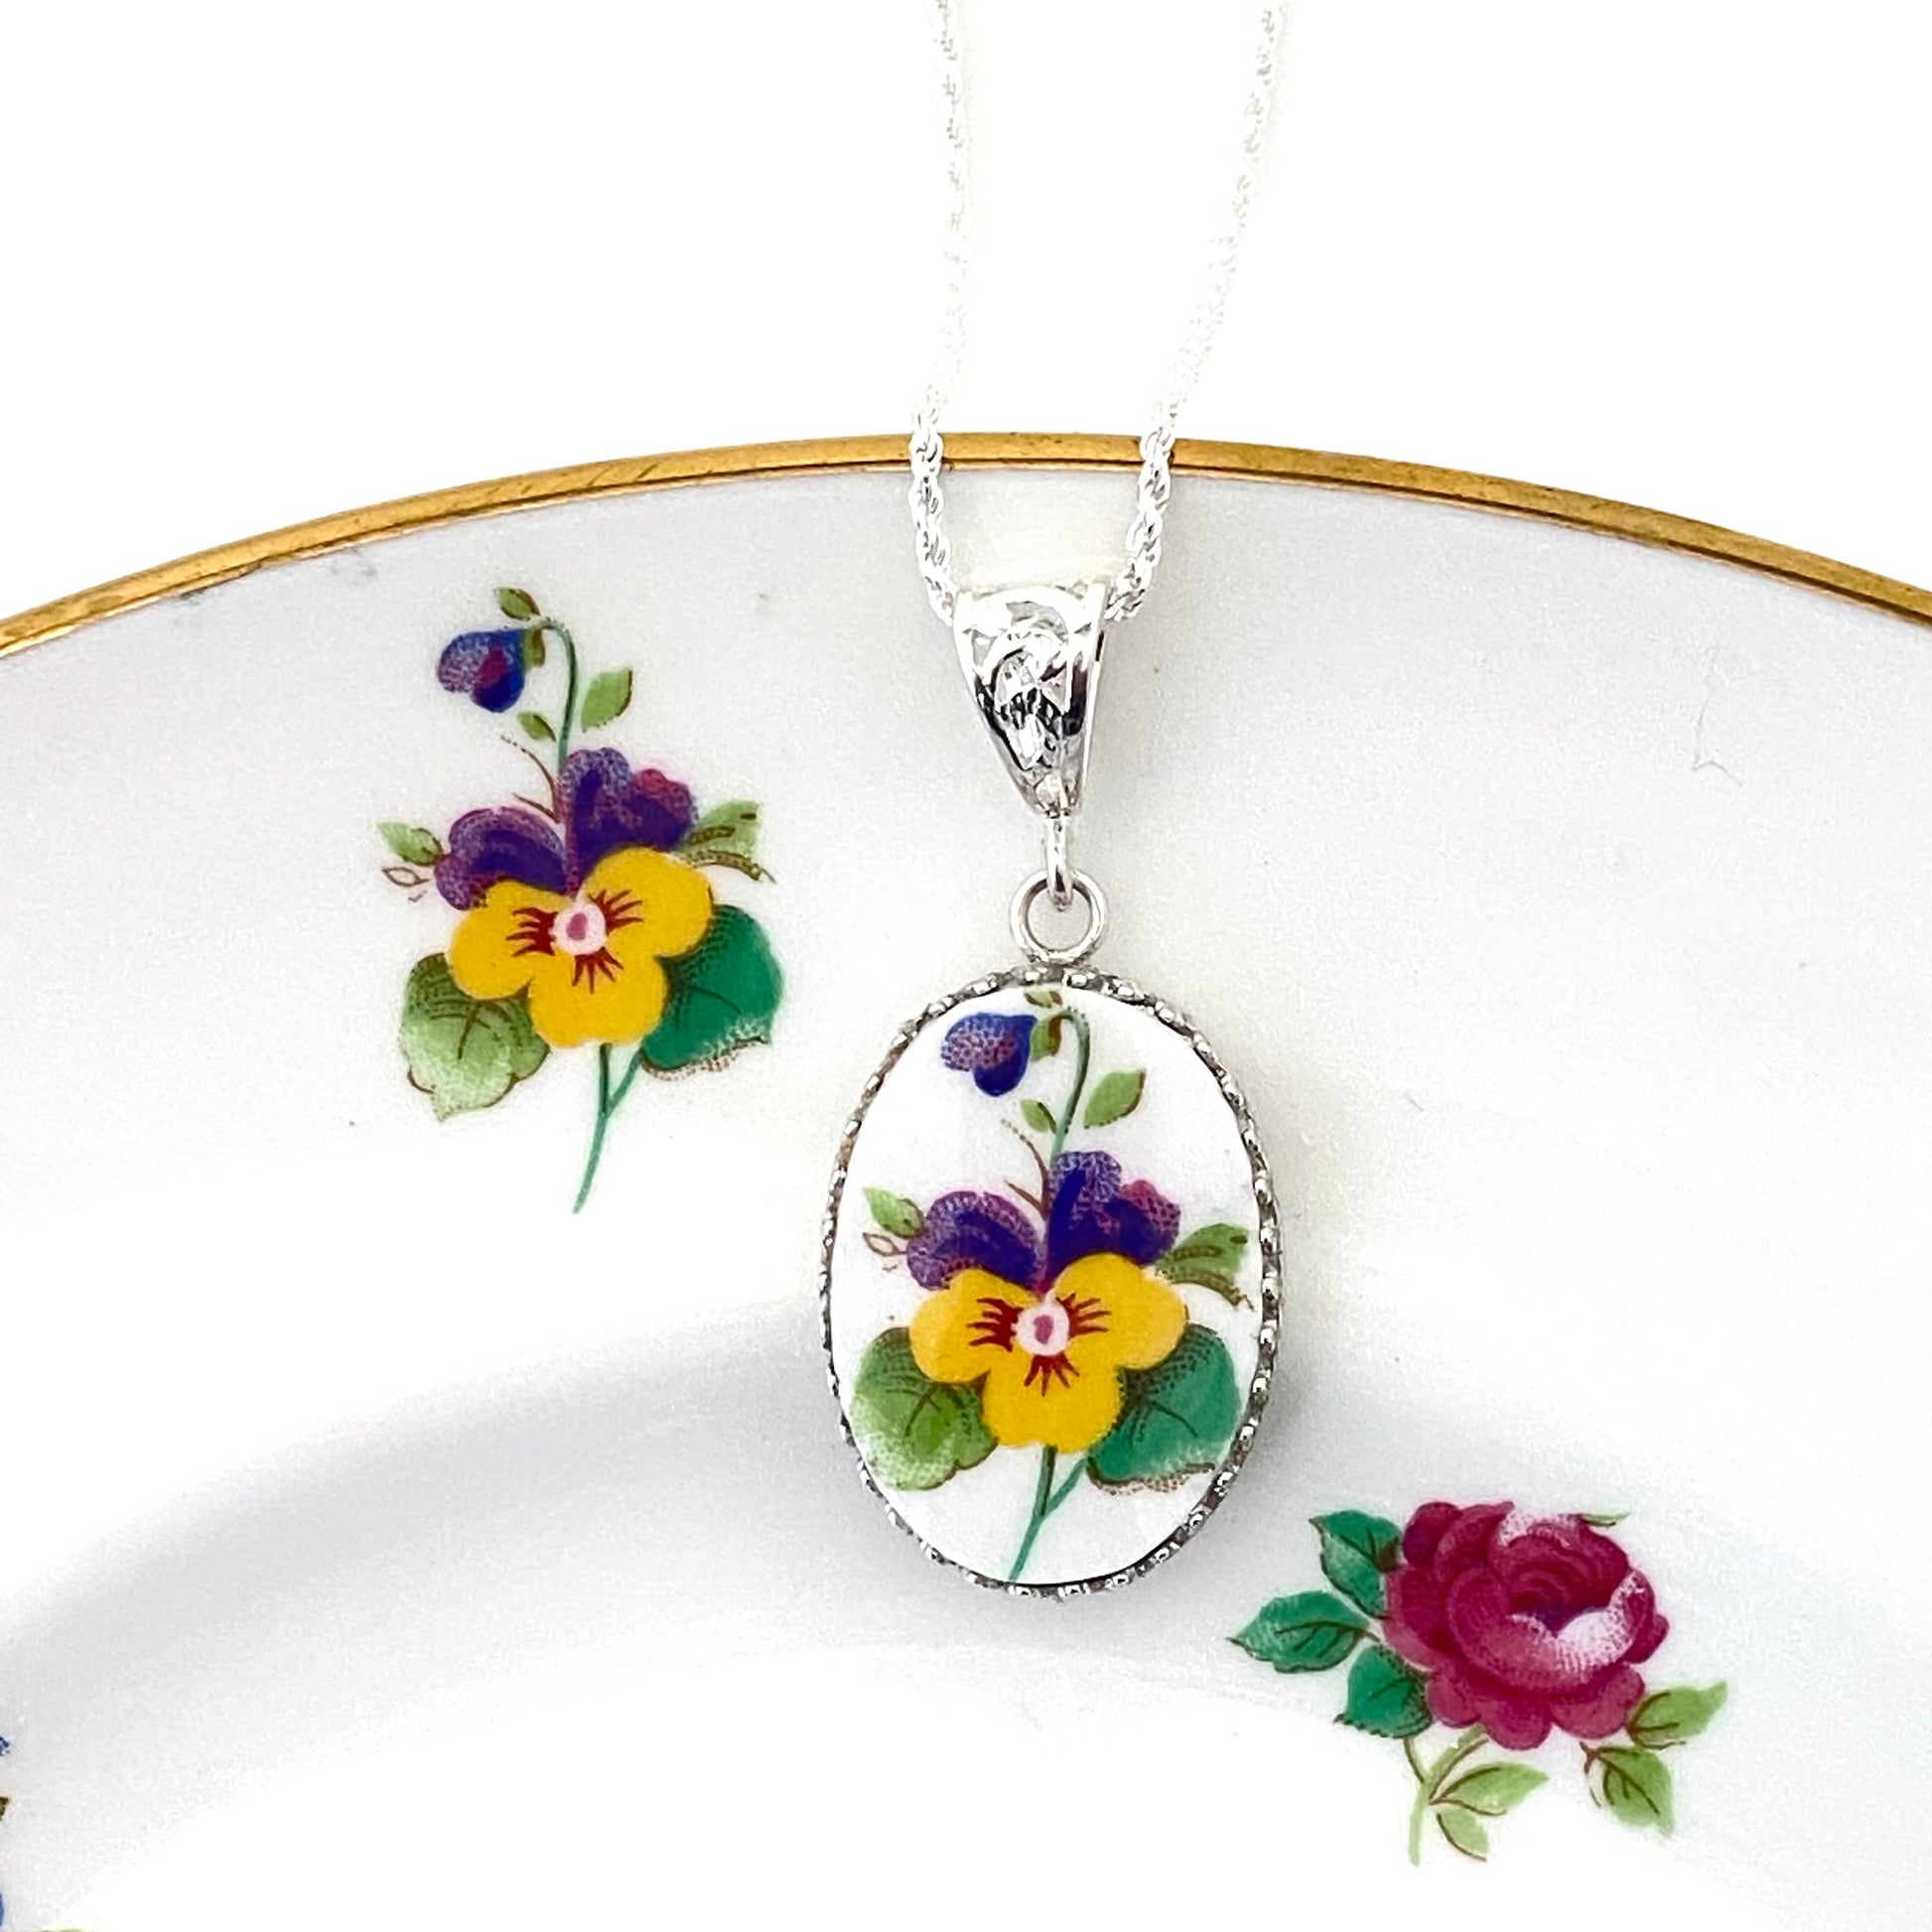 Pansy Flower Necklace, Broken China Jewelry, 20th Anniversary Gift for Wife, Repurposed Vintage China, Yellow and Purple Flower Necklace